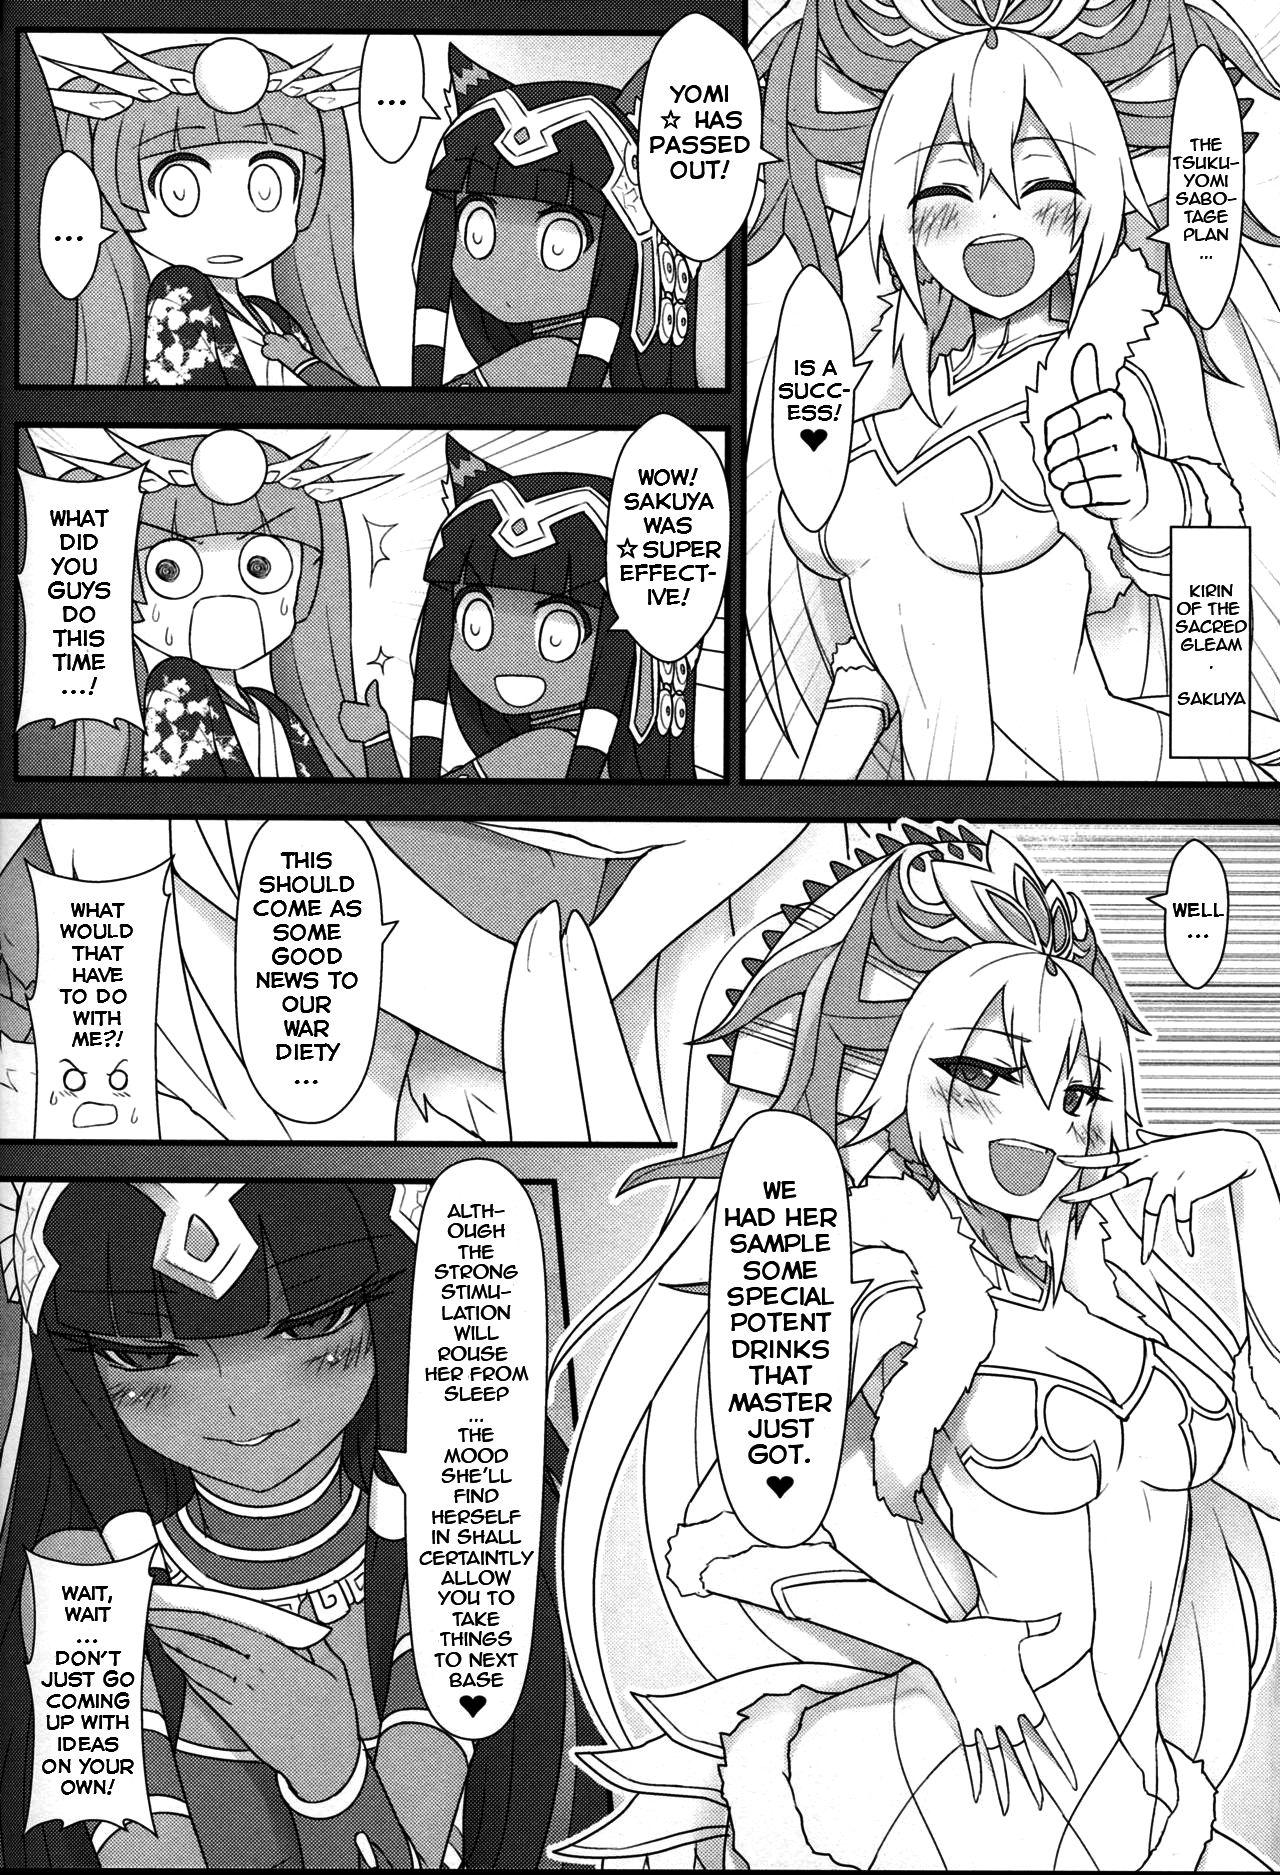 Stroking PazuYomi! - Puzzle and dragons Workout - Page 5